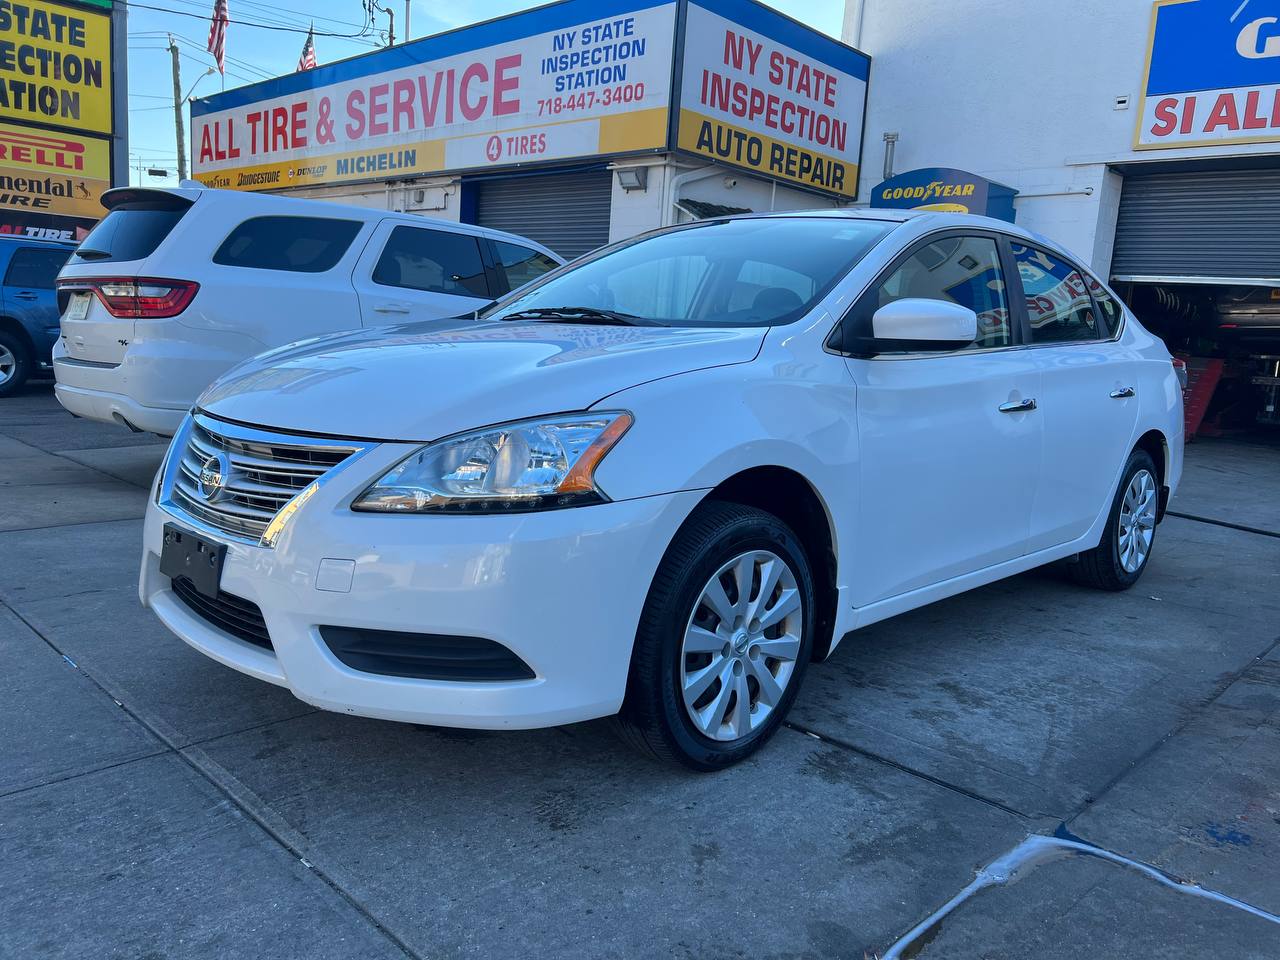 Used Car - 2014 Nissan Sentra S for Sale in Staten Island, NY